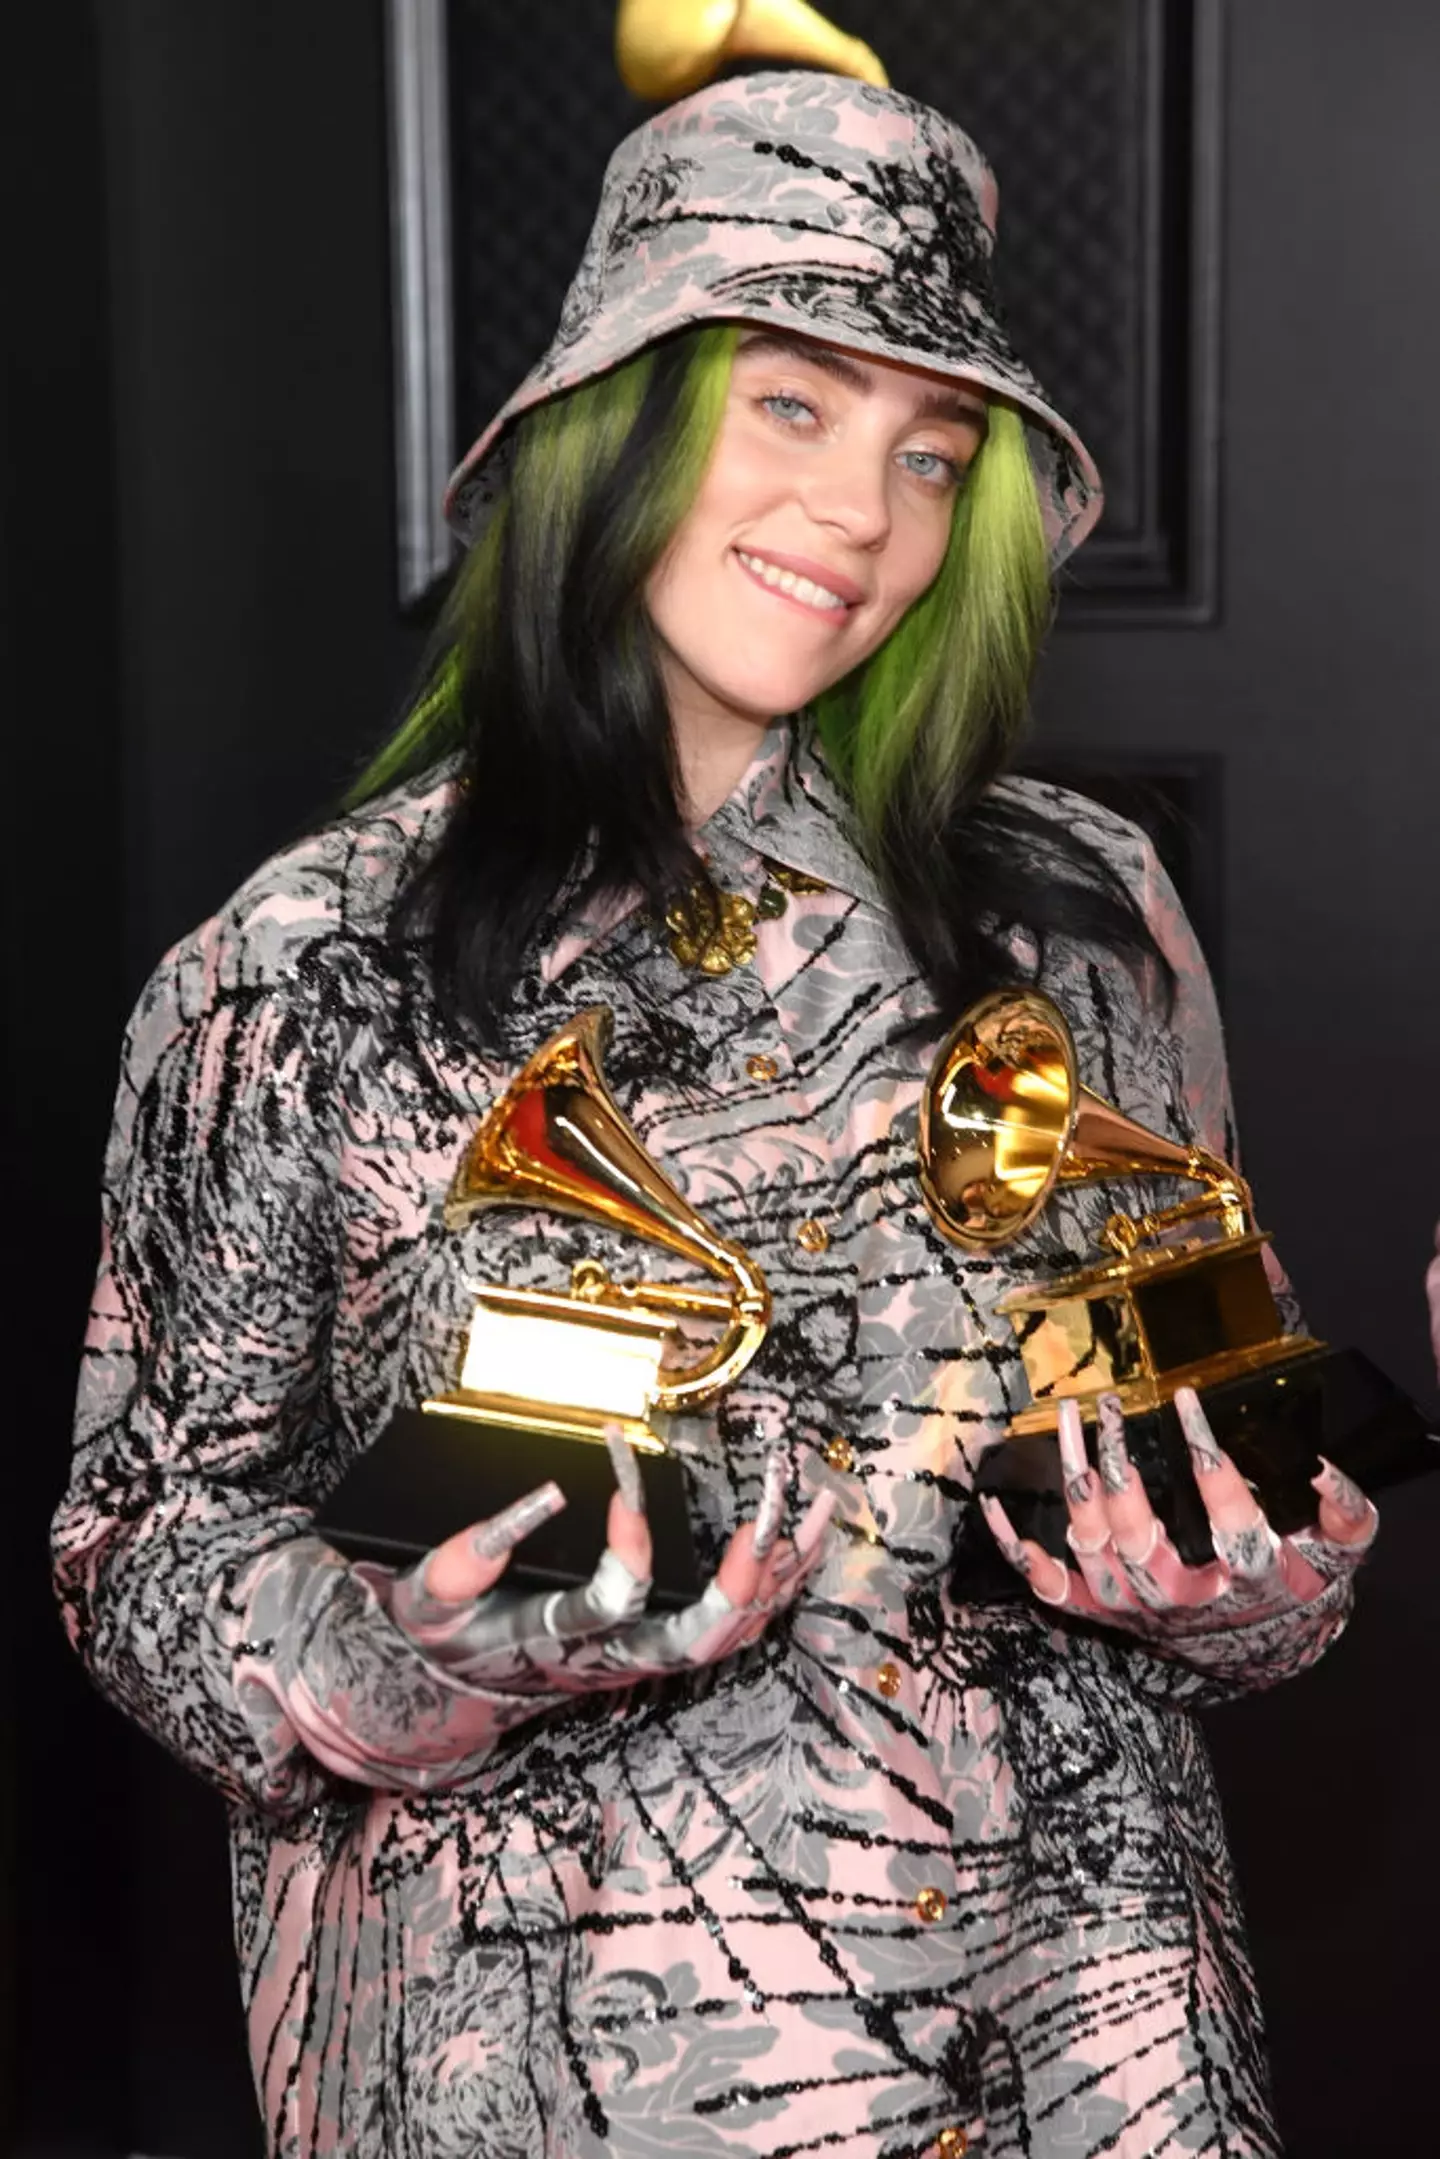 Billie Eilish said she's been in love with girls for her 'whole life'. (Kevin Mazur/Getty Images for The Recording Academy)